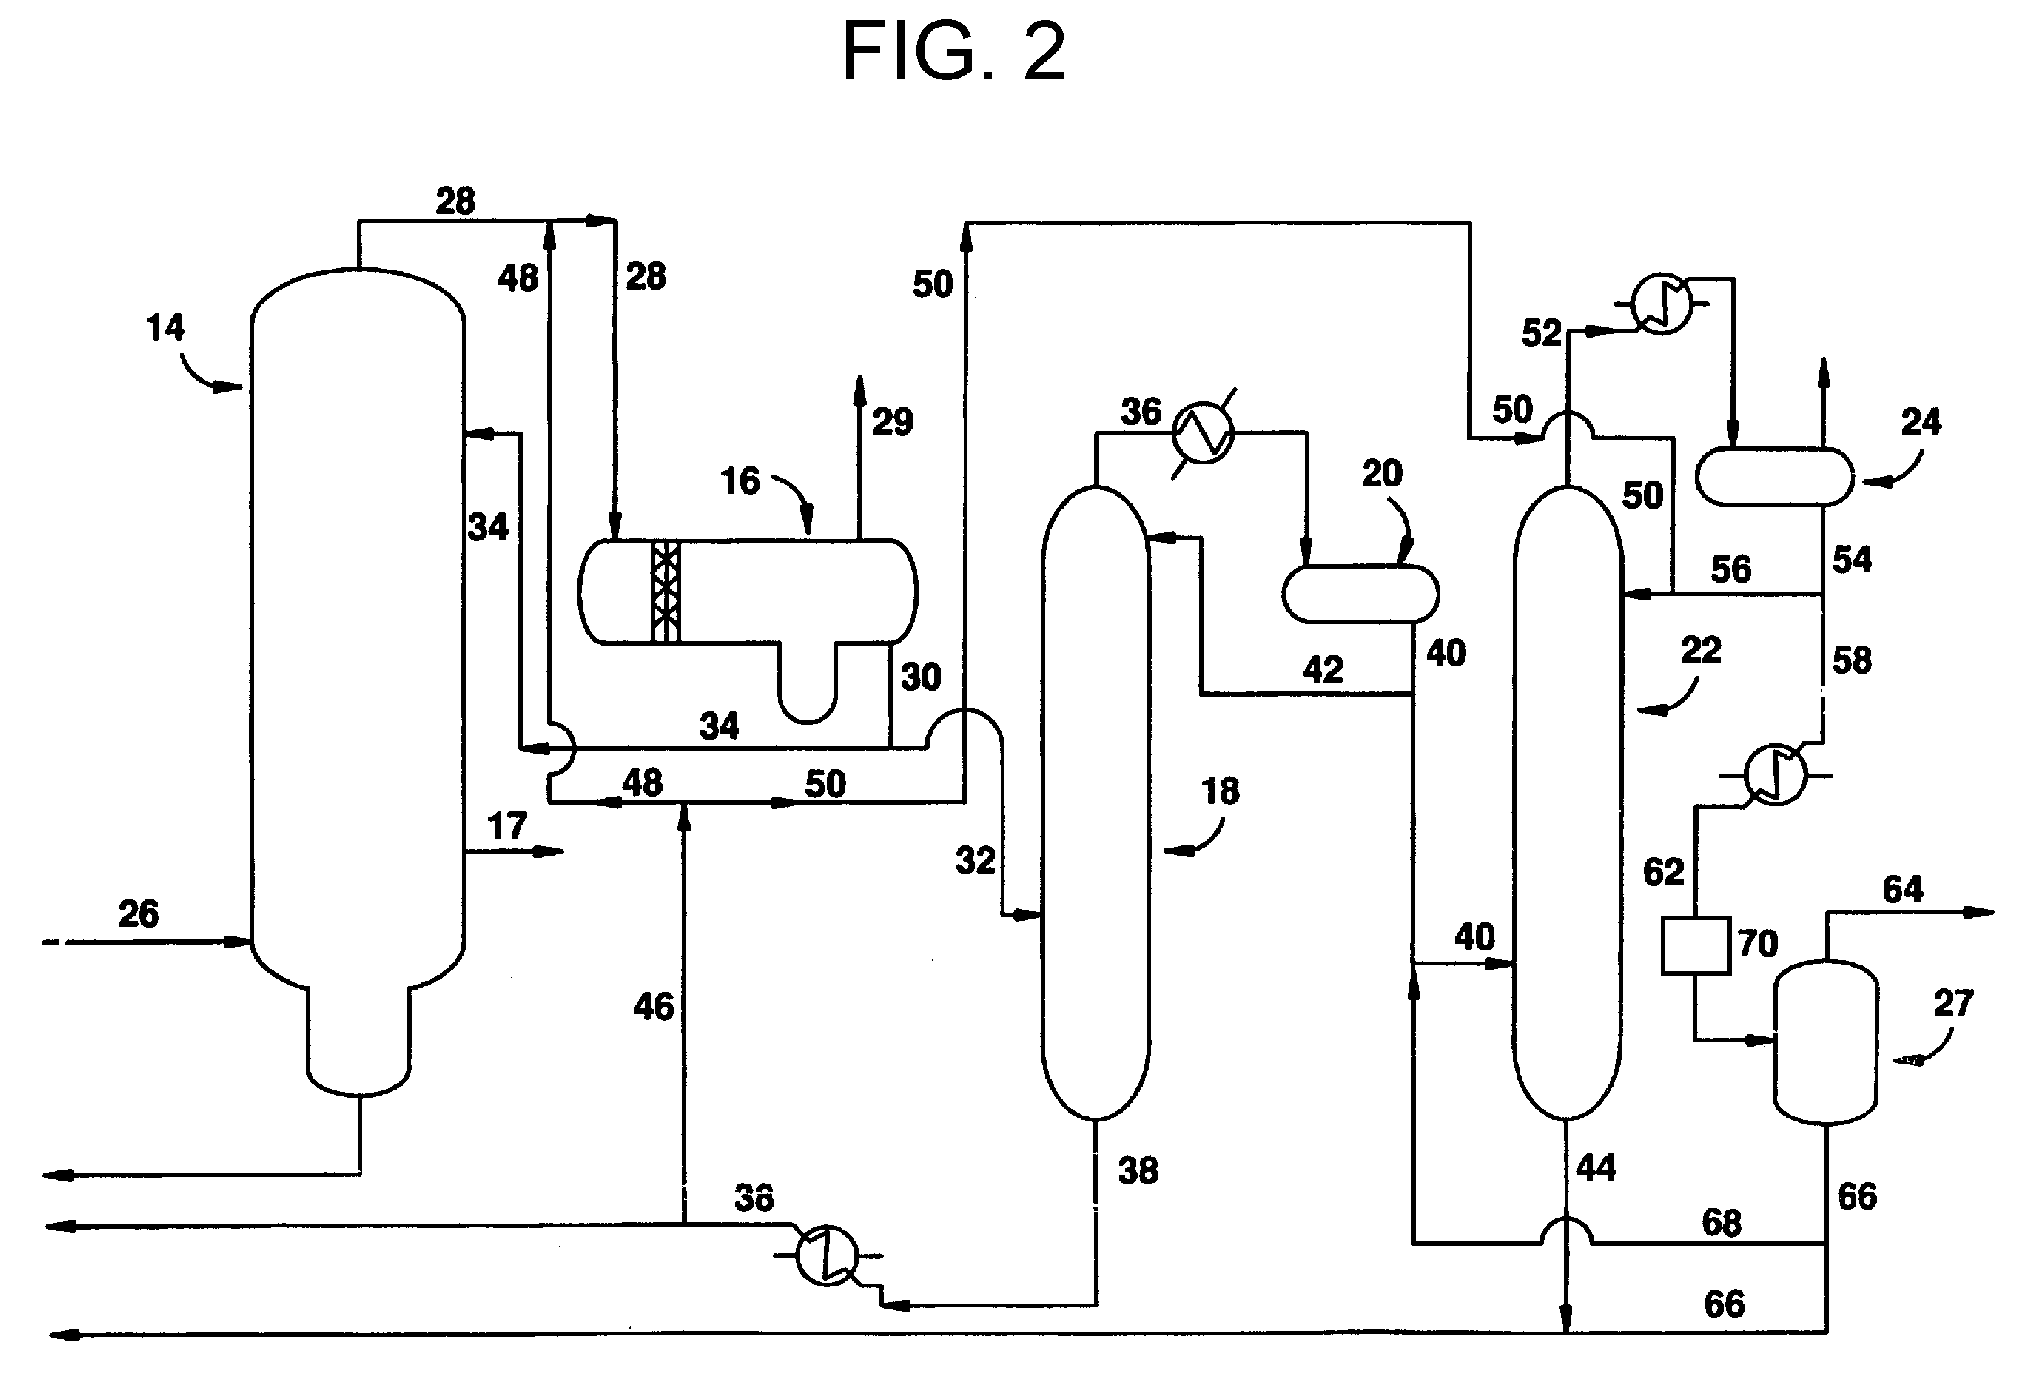 Control method for process of removing permanganate reducing compounds from methanol carbonylation process